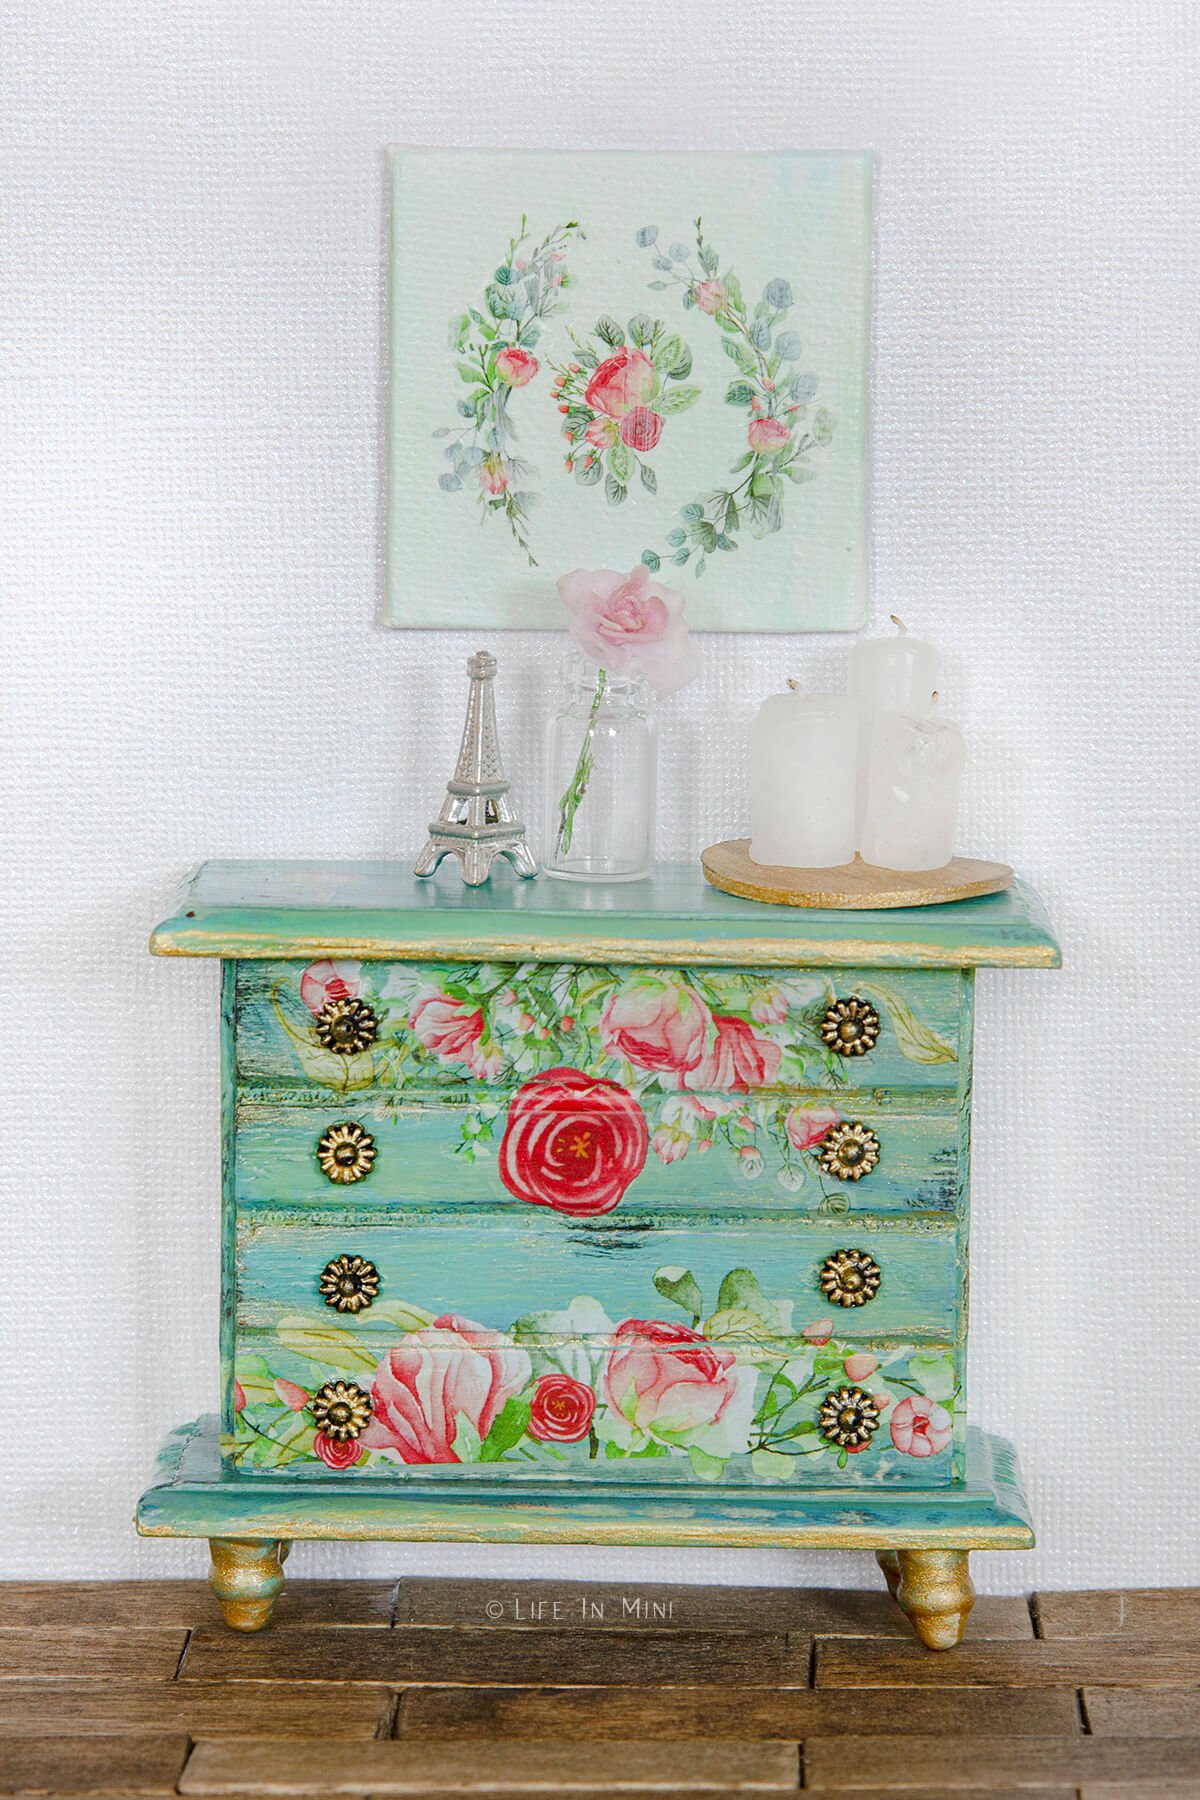 A teal dollhouse dresser with floral rub ons with miniature accessories on it